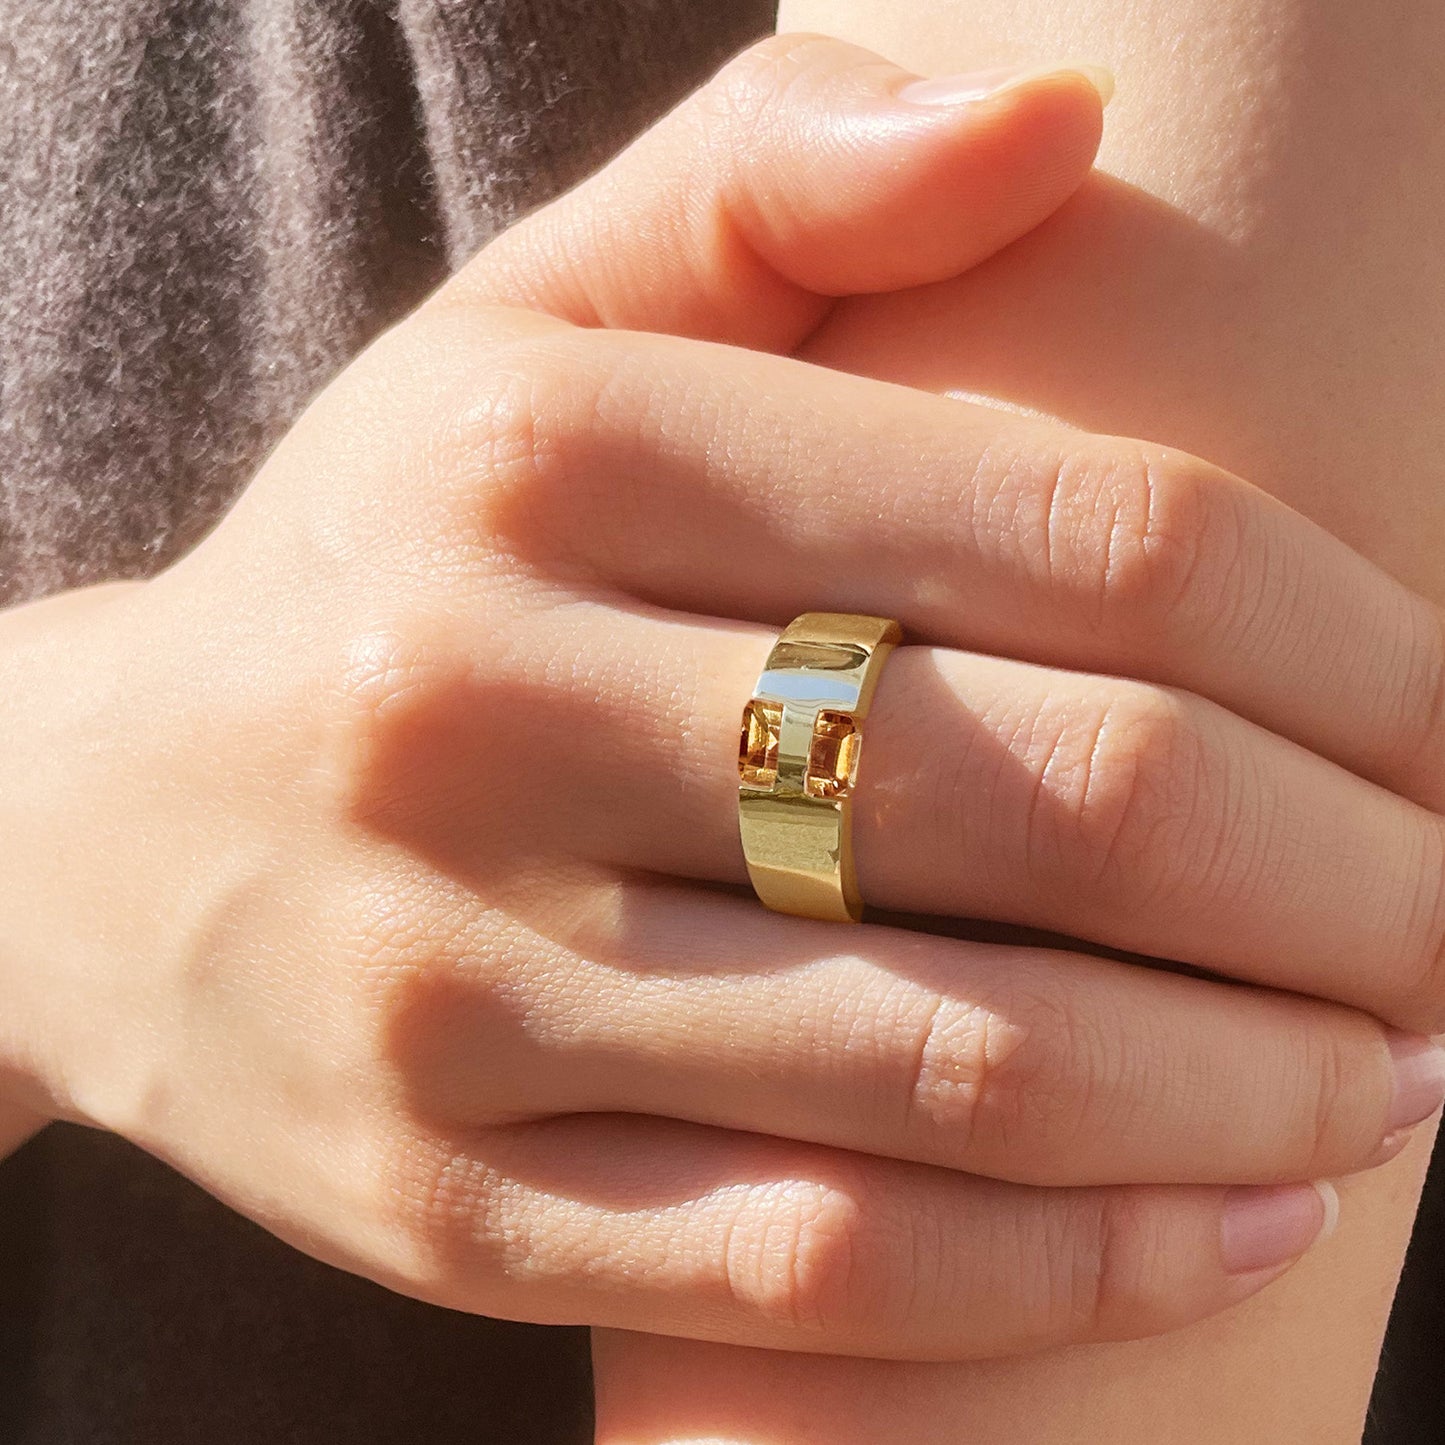 [Citrine] hide and sparkle gold #exploring